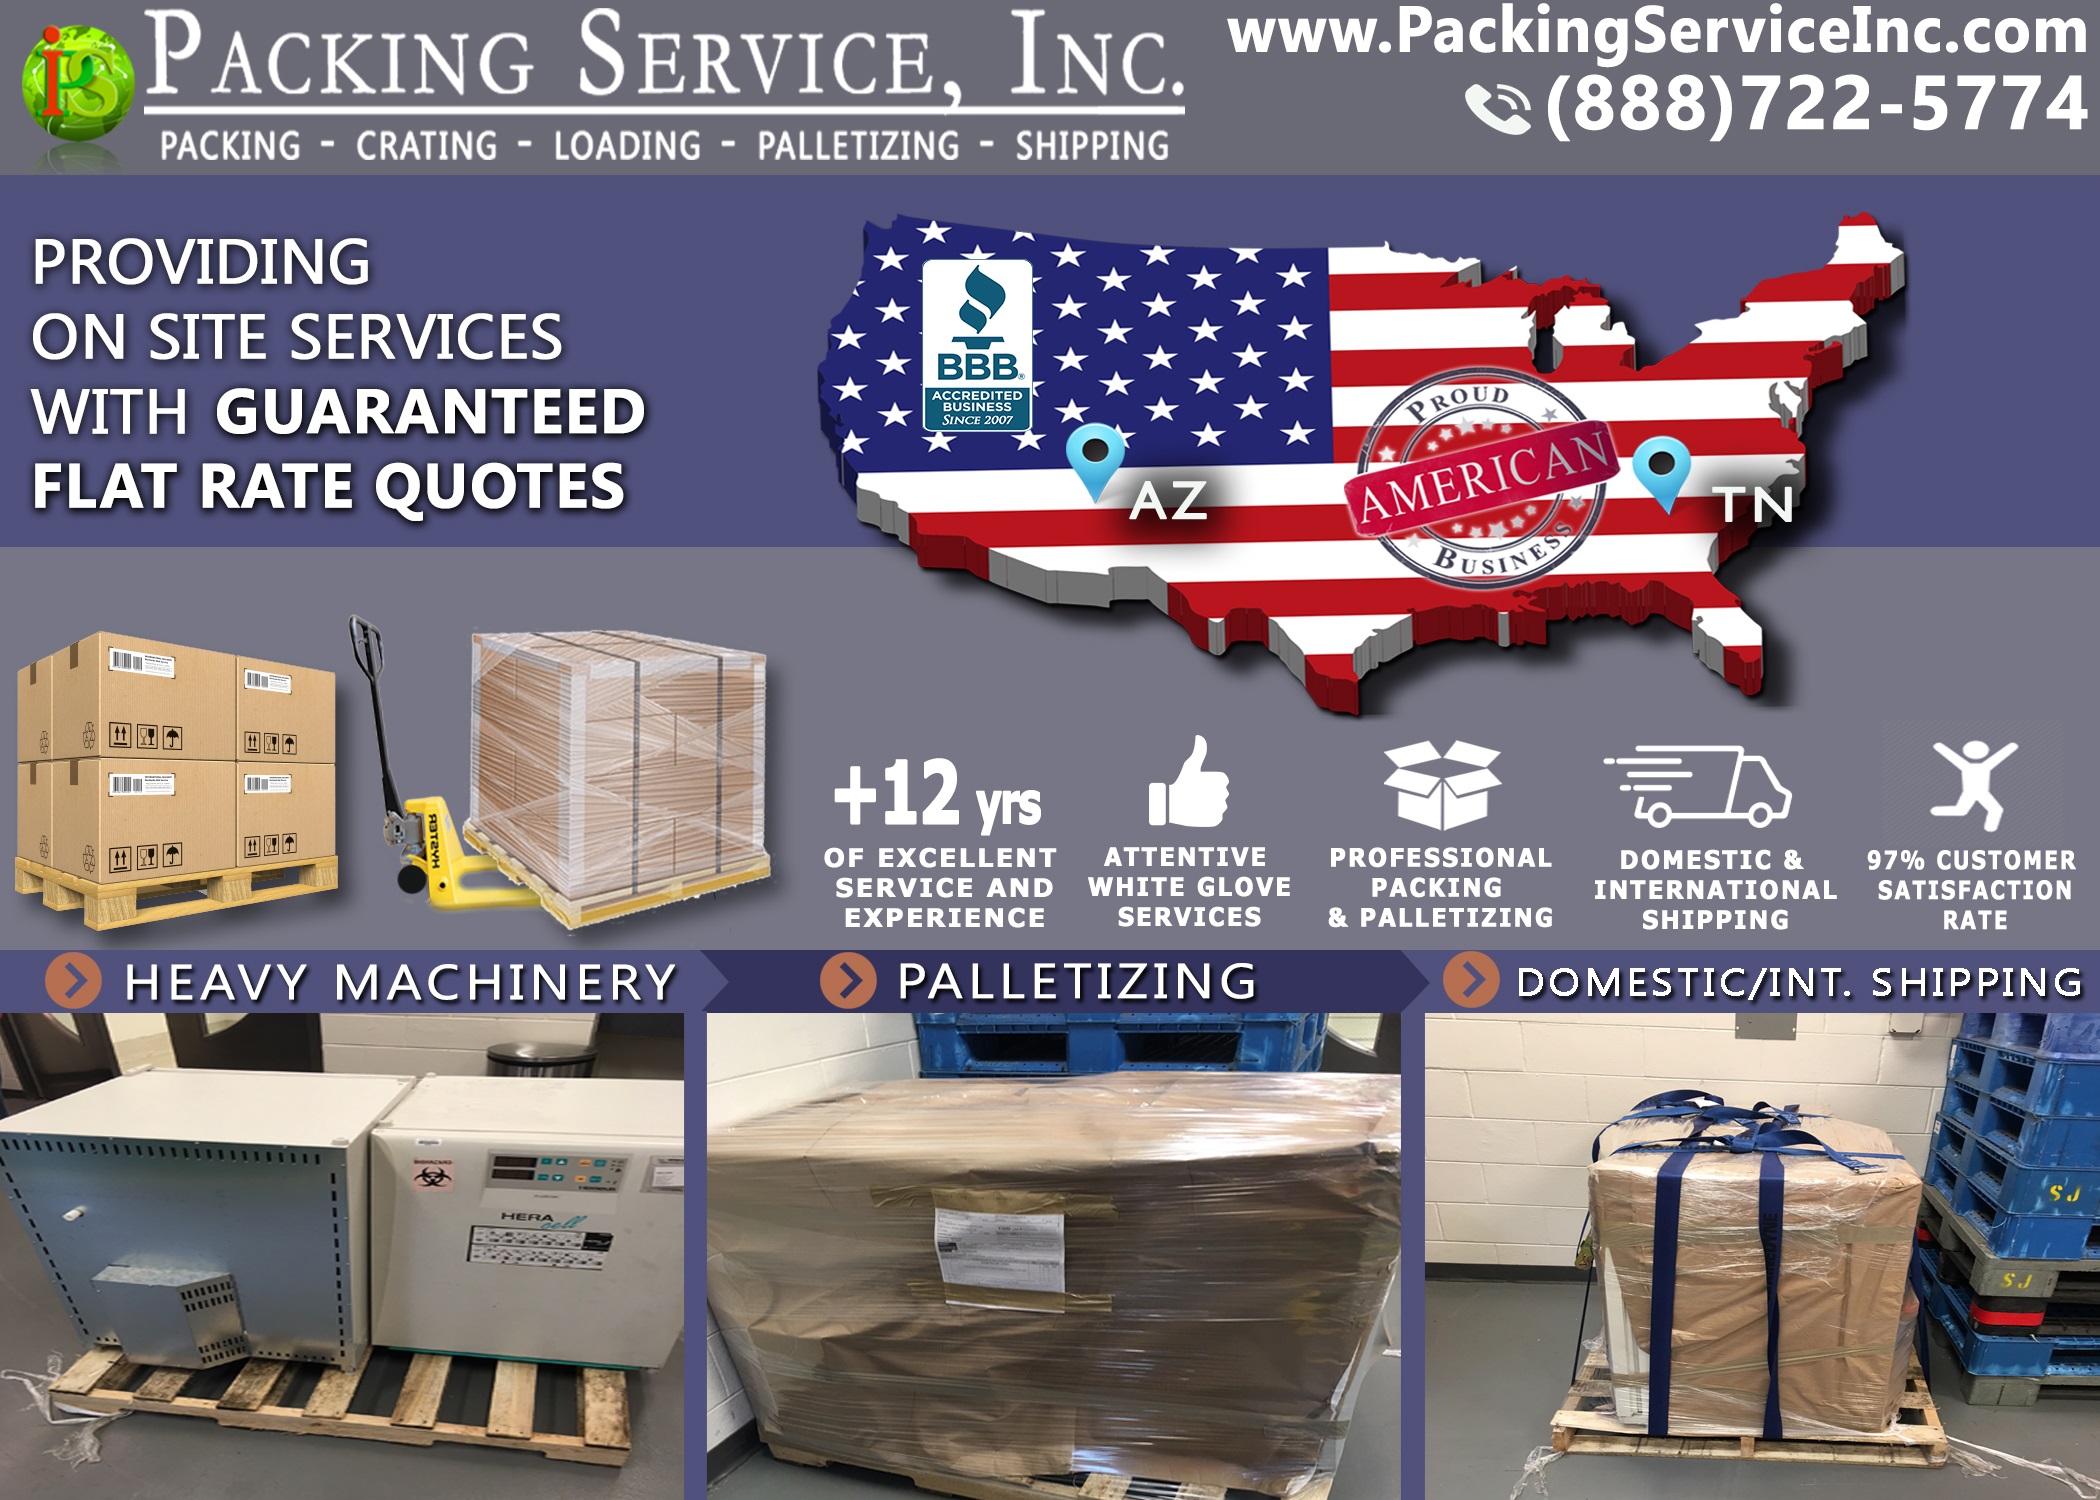 Wrapping, palletizing and Shipping from TN to AZ with Packing Service, Inc. - 527